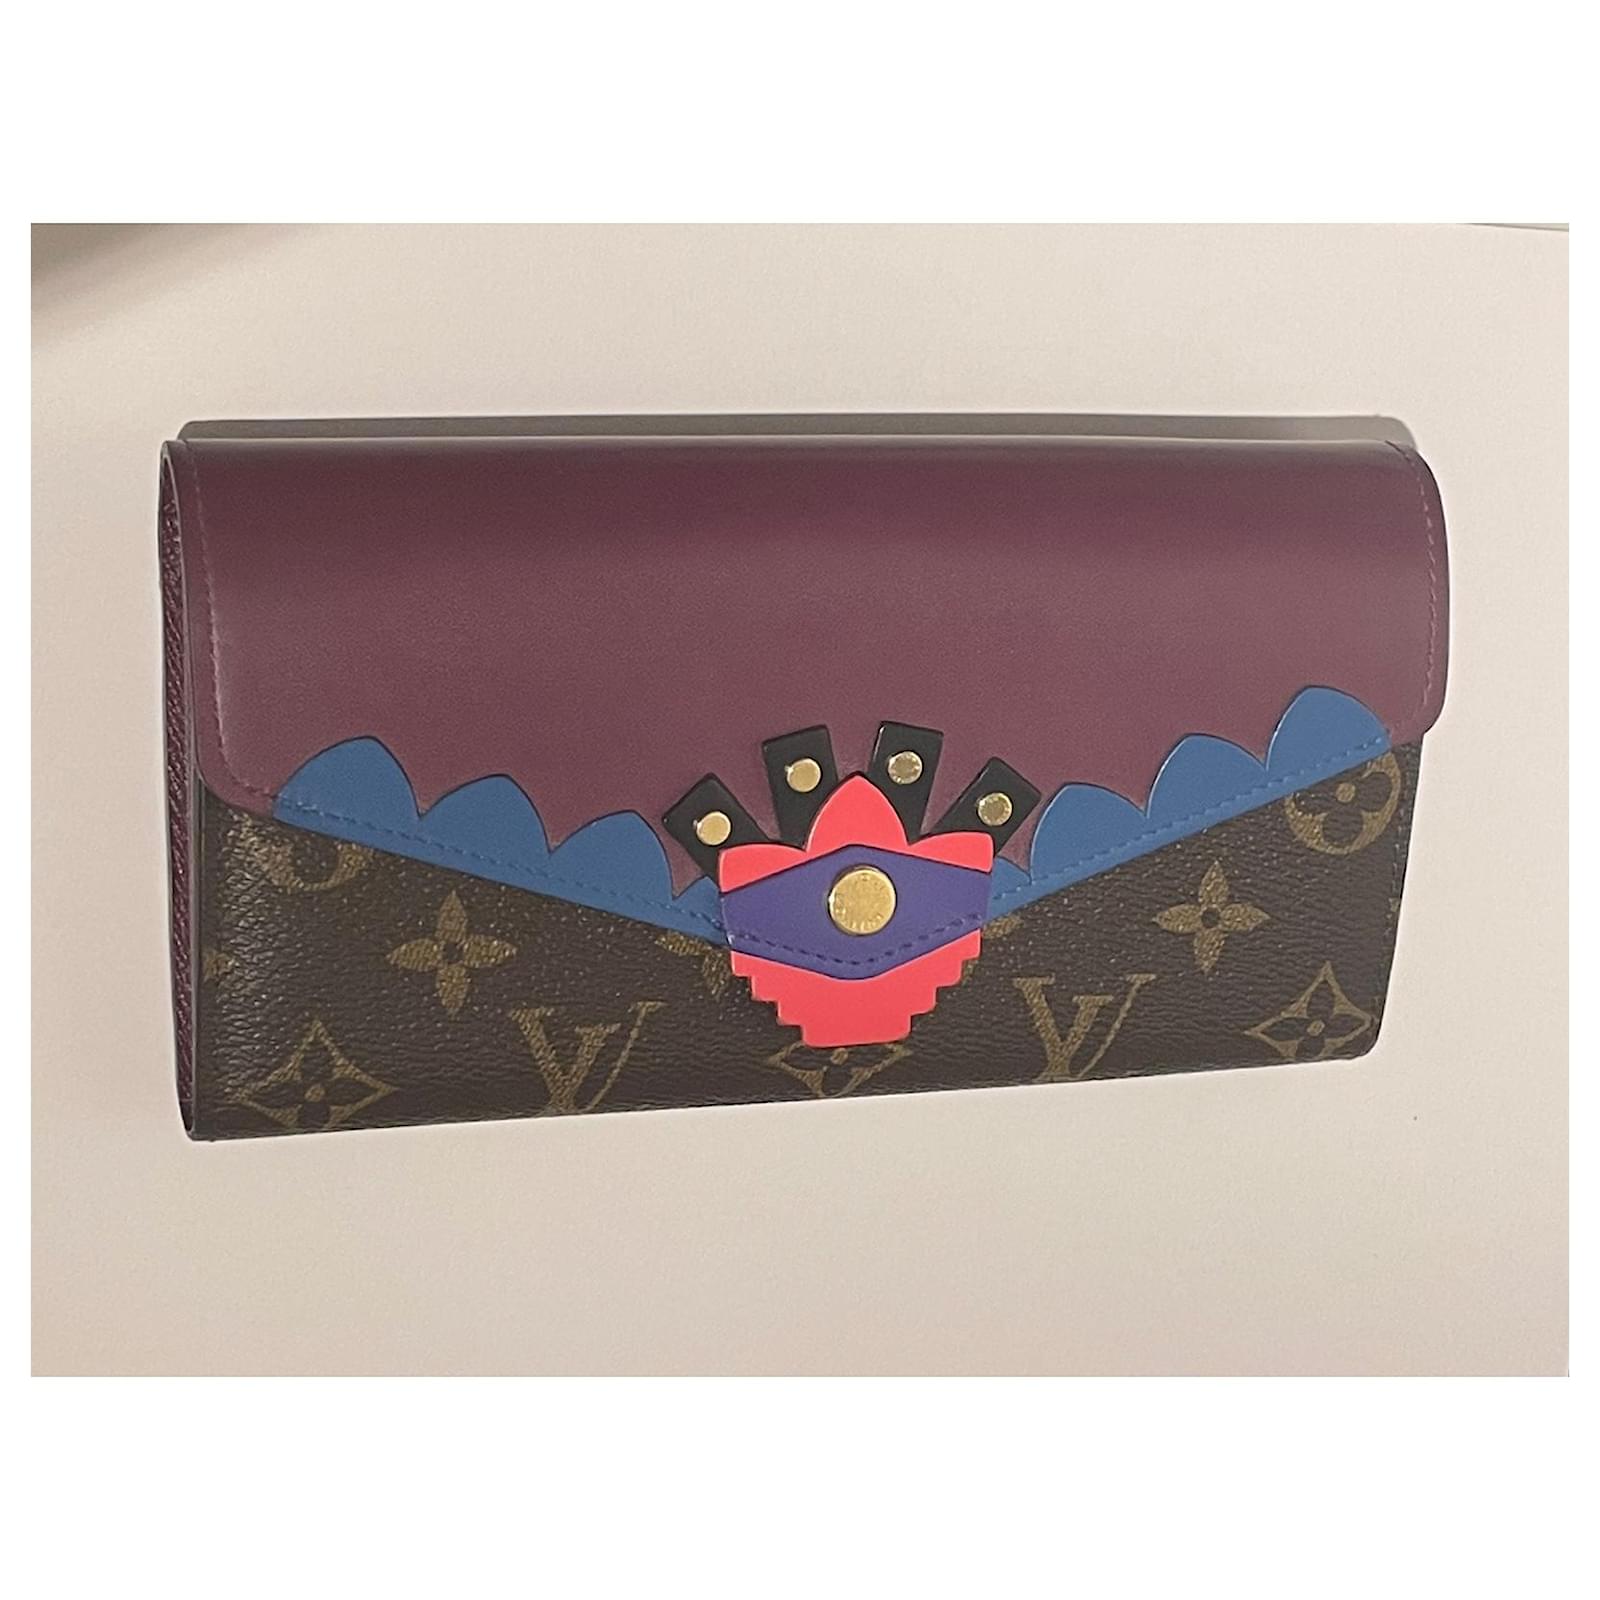 Louis Vuitton Tribal Mask Sarah Wallet Monogram Canvas and Leather